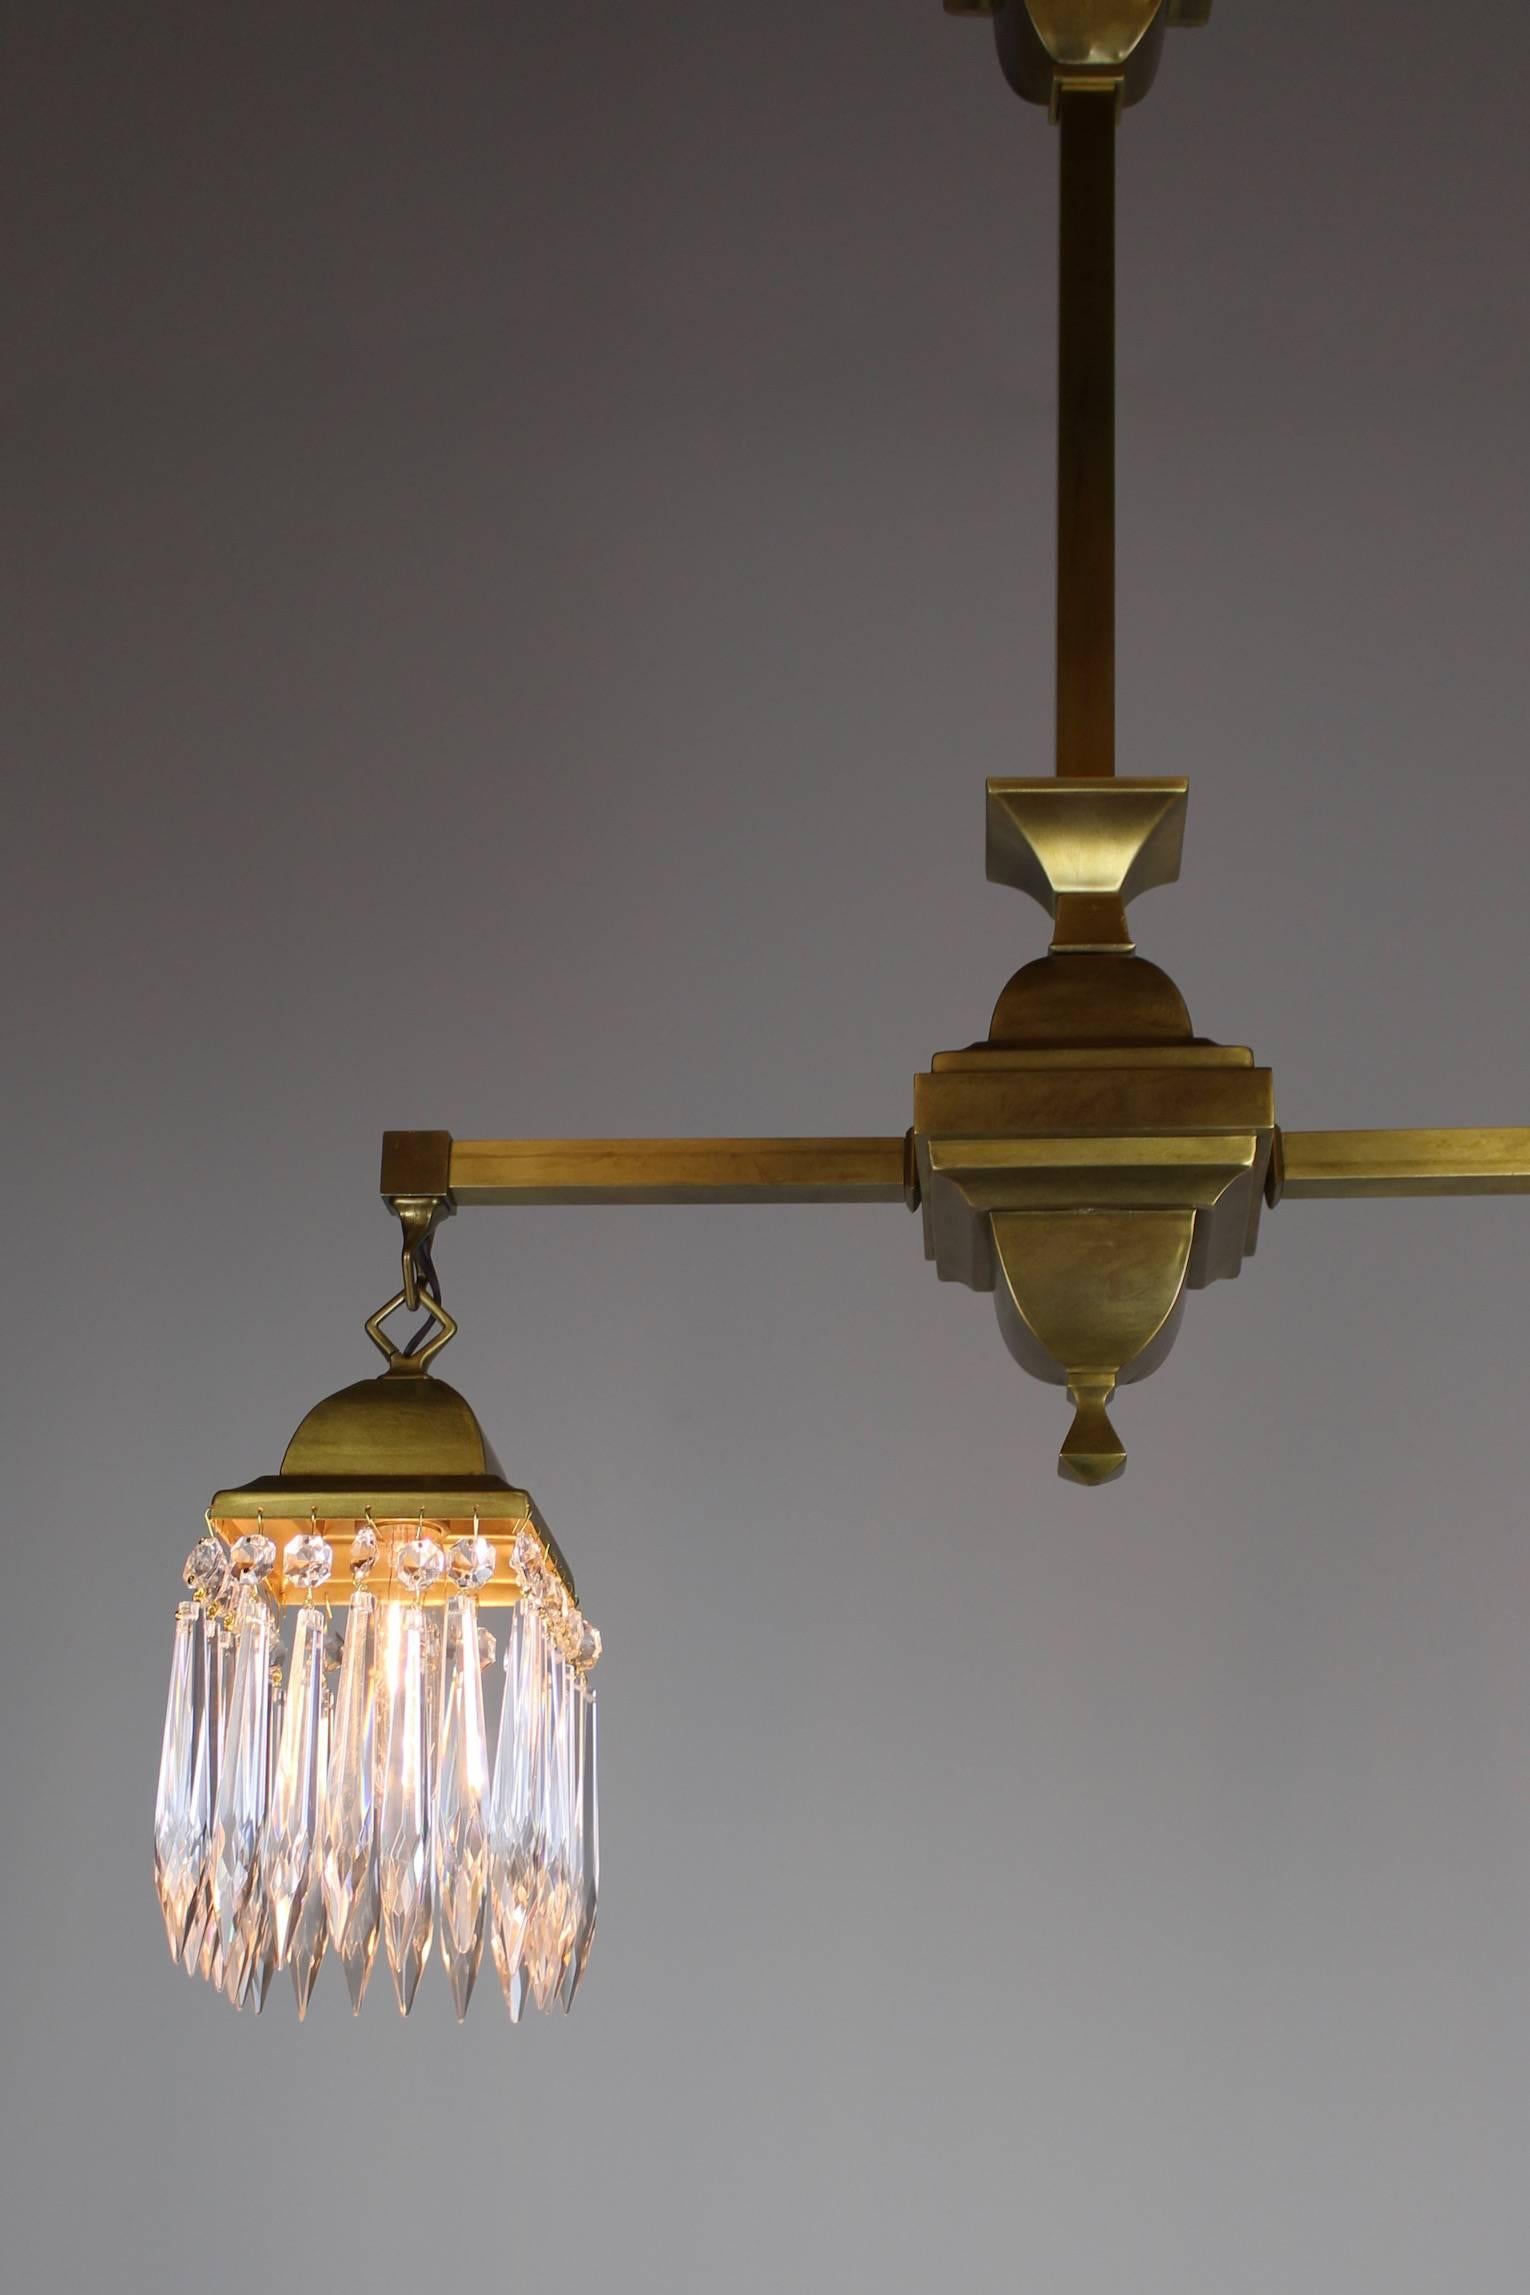 An original mission-link fixture with crystal shades, a hard to find original combination, circa 1910. This two-arm fixture, has been restored to its original satin brass finish. A very pleasant design and striking choice for any